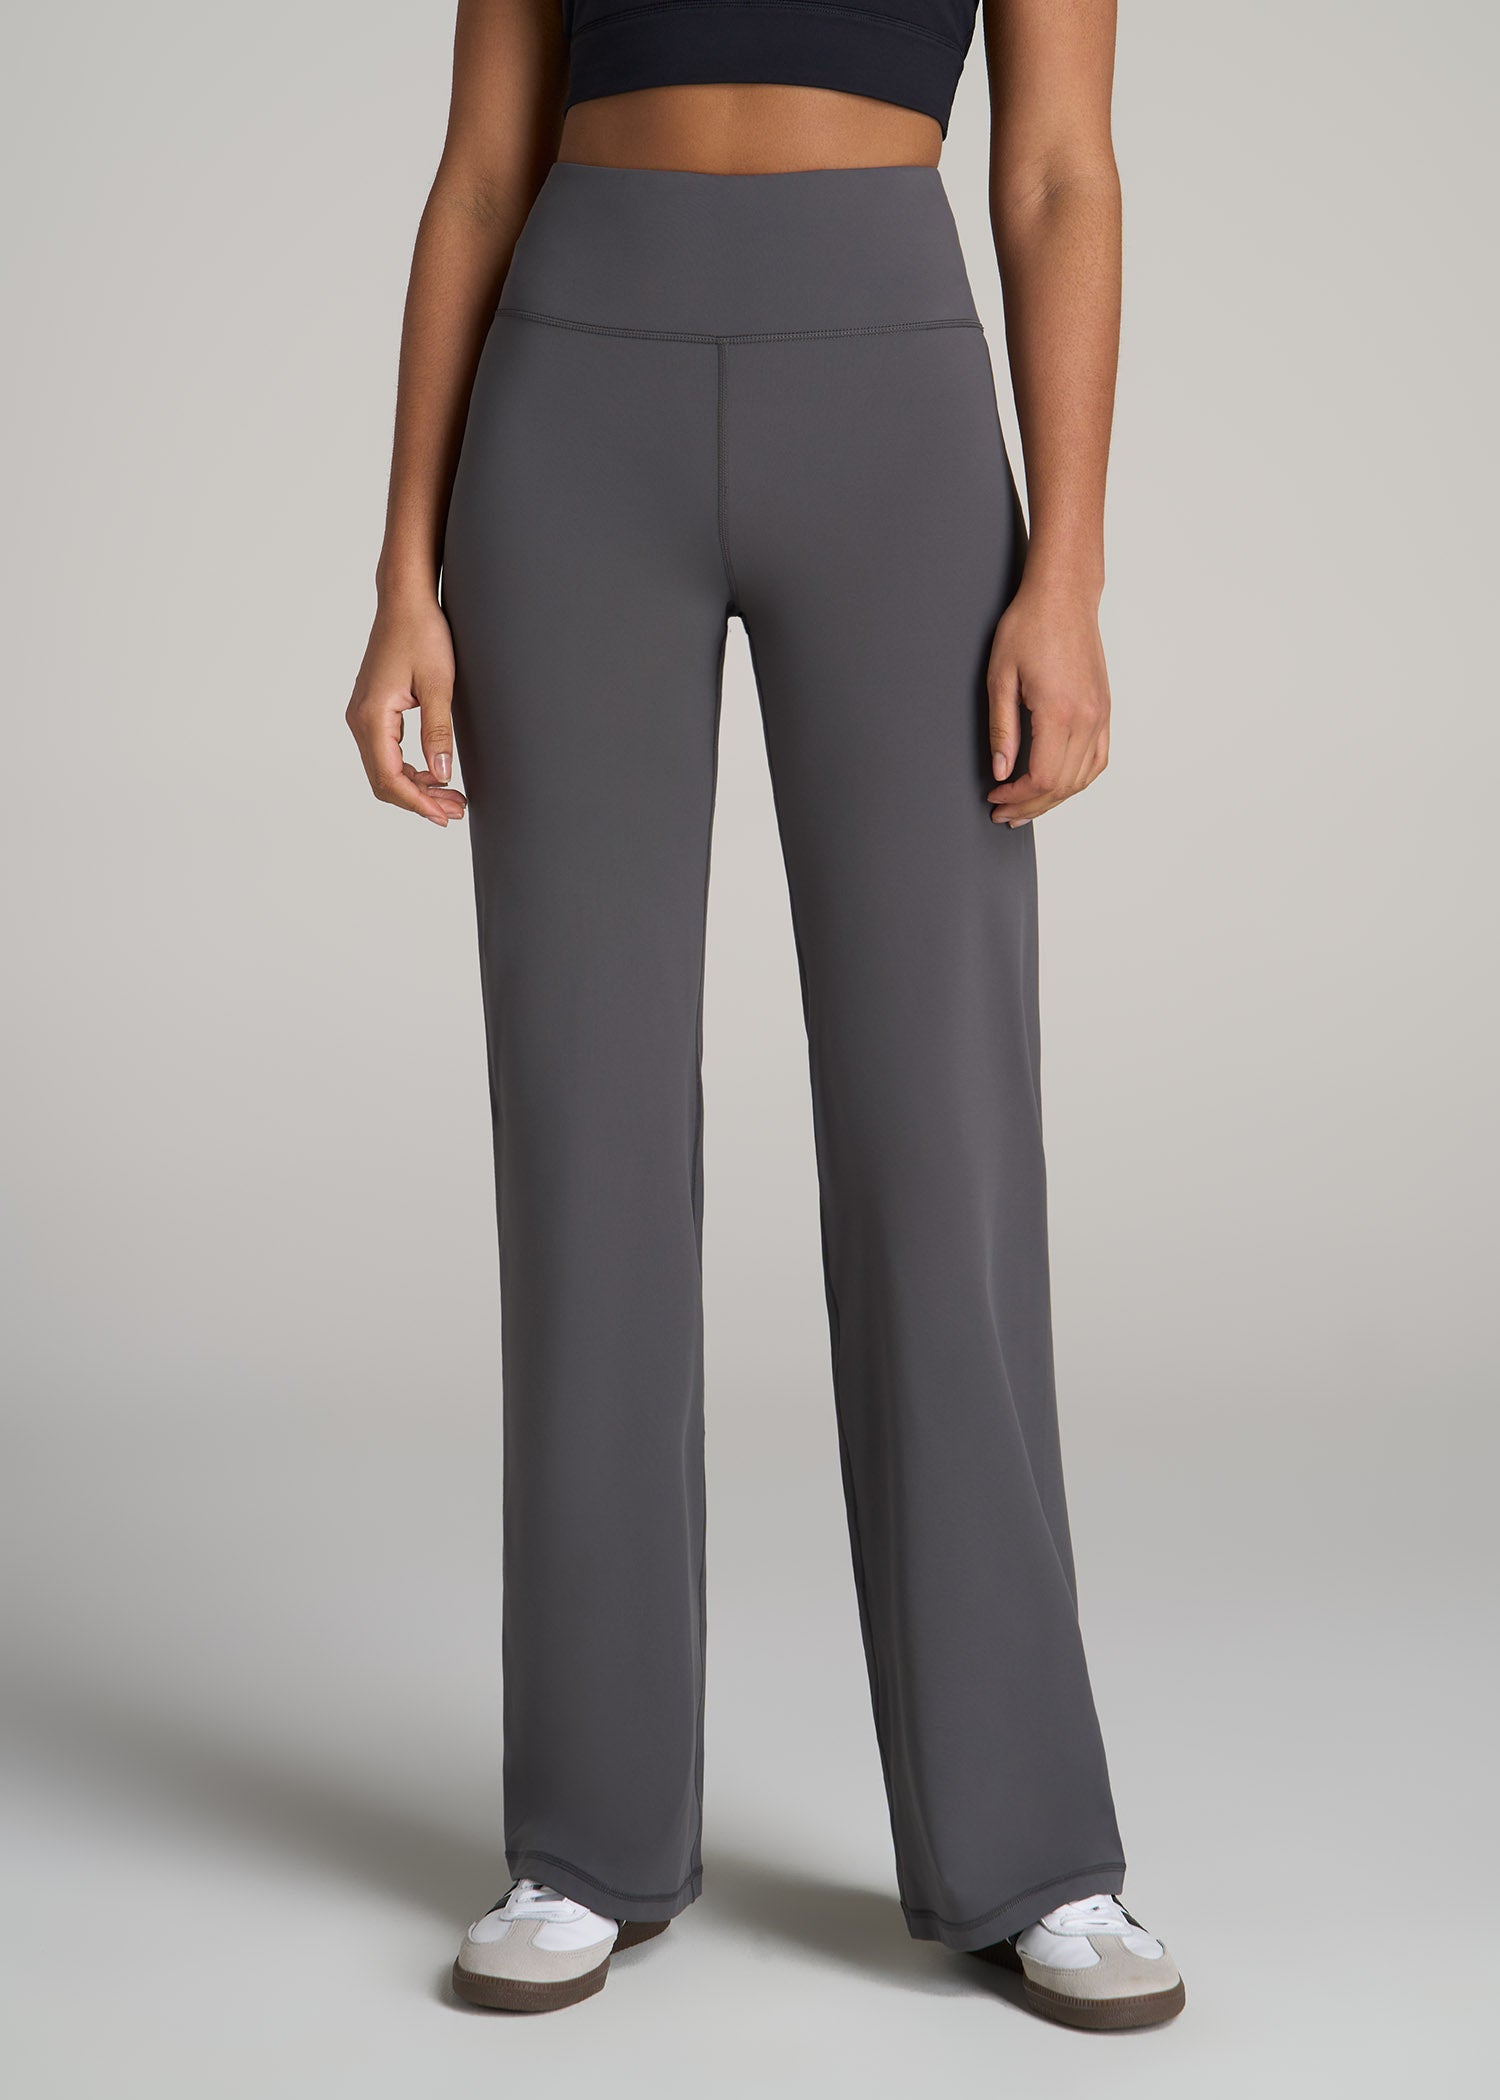 The First Class Lounge Pant for Women